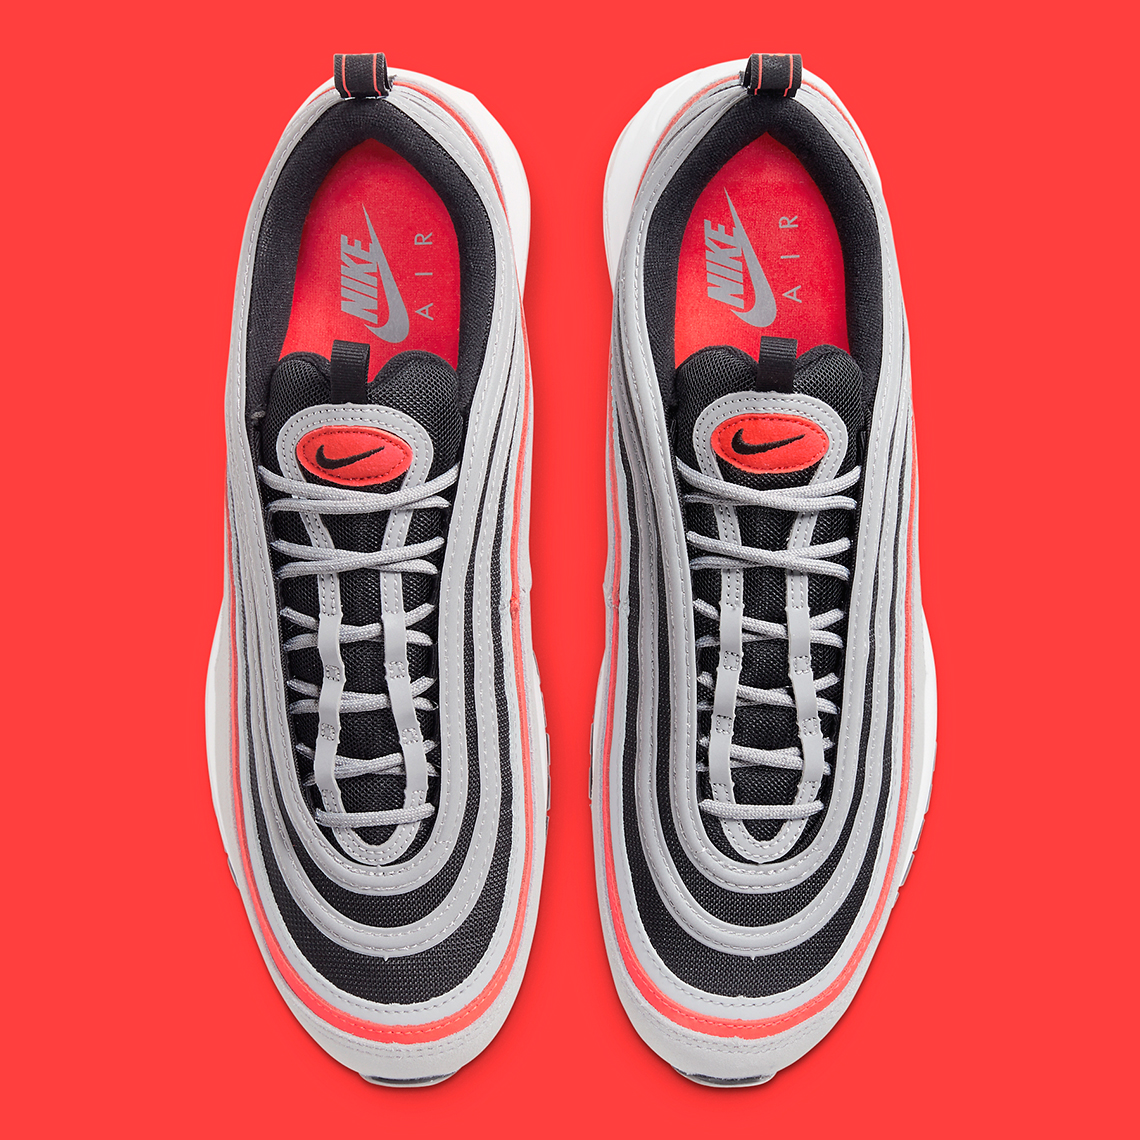 Nike Air Max 97 Wold Grey Radiant Red Black White Db4611 002 6